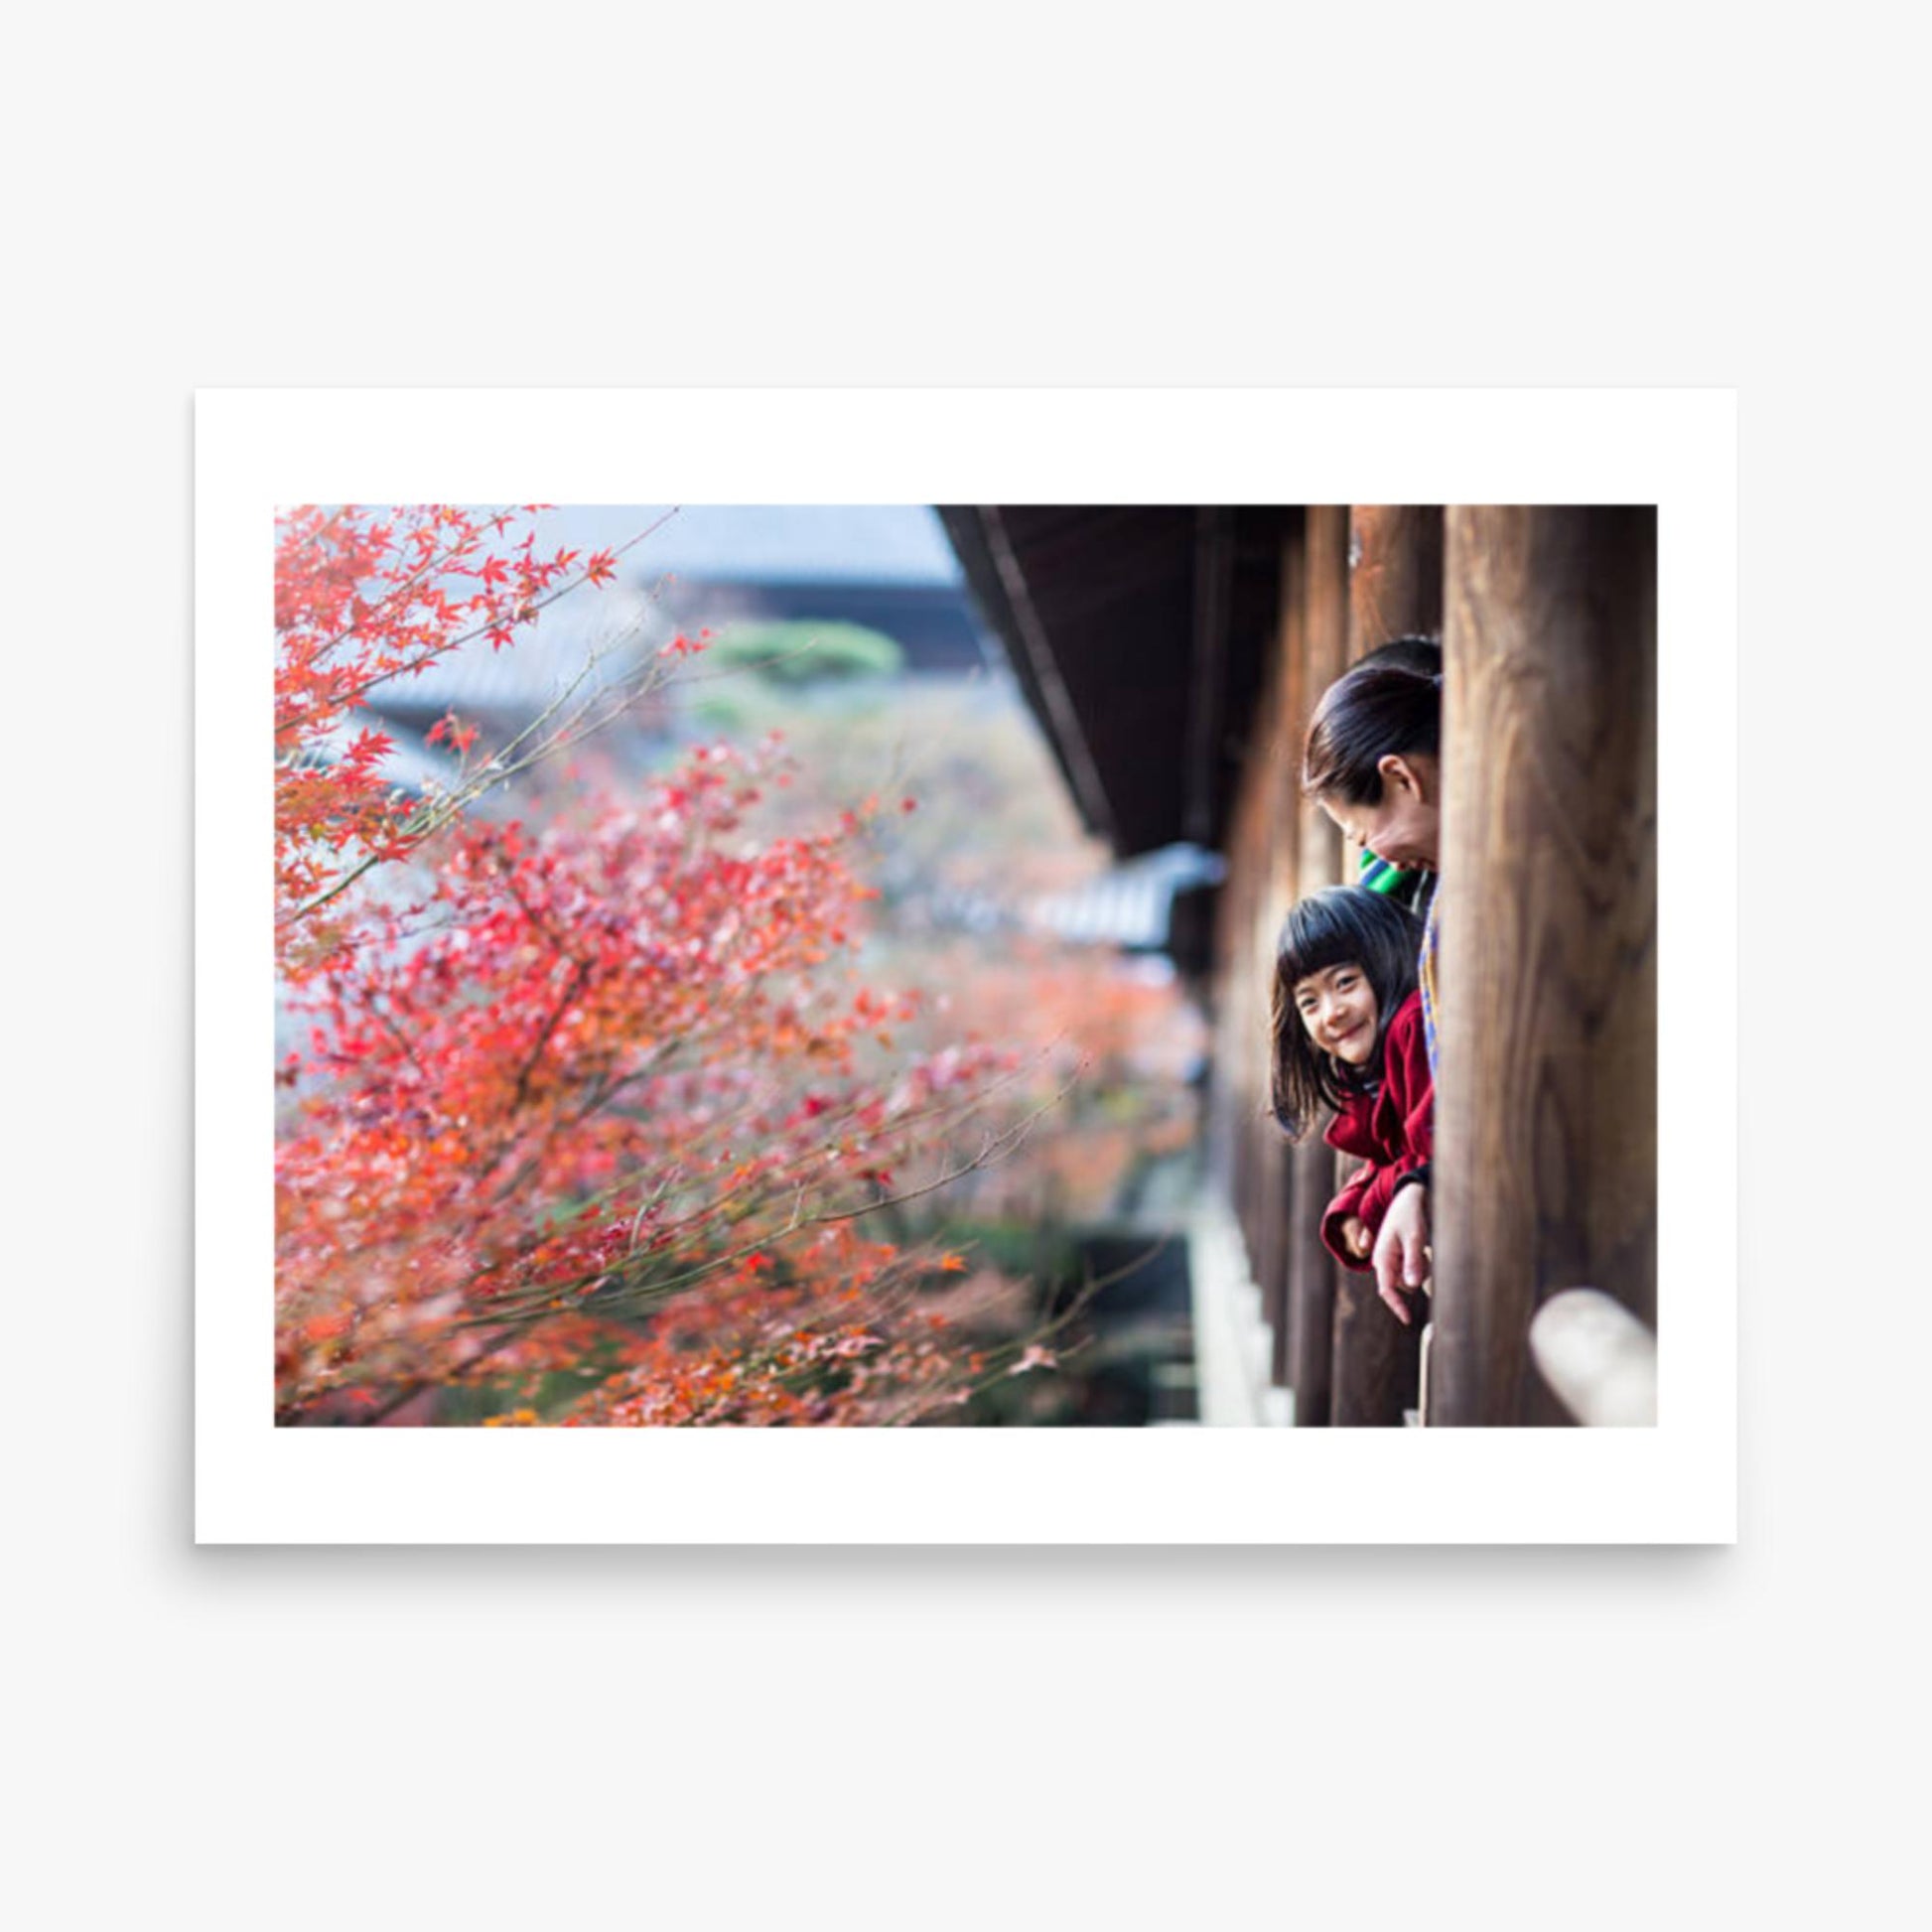 Father, mother and daughter at a temple enjoying autumn leaves 18x24 in Poster